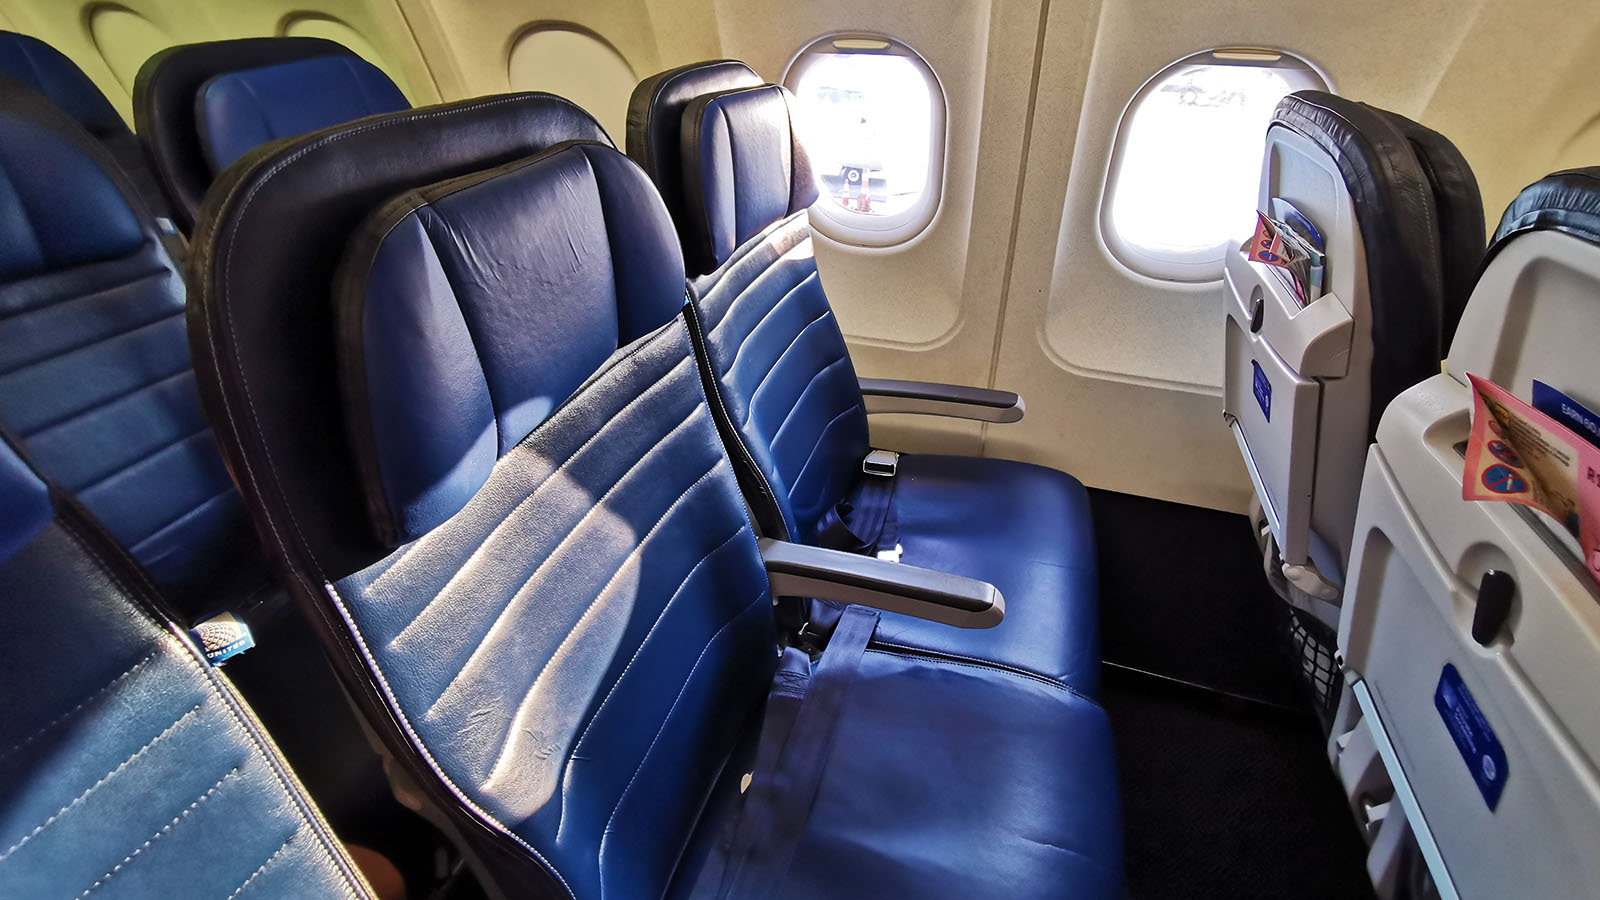 United's blue Economy seats on the Airbus A319